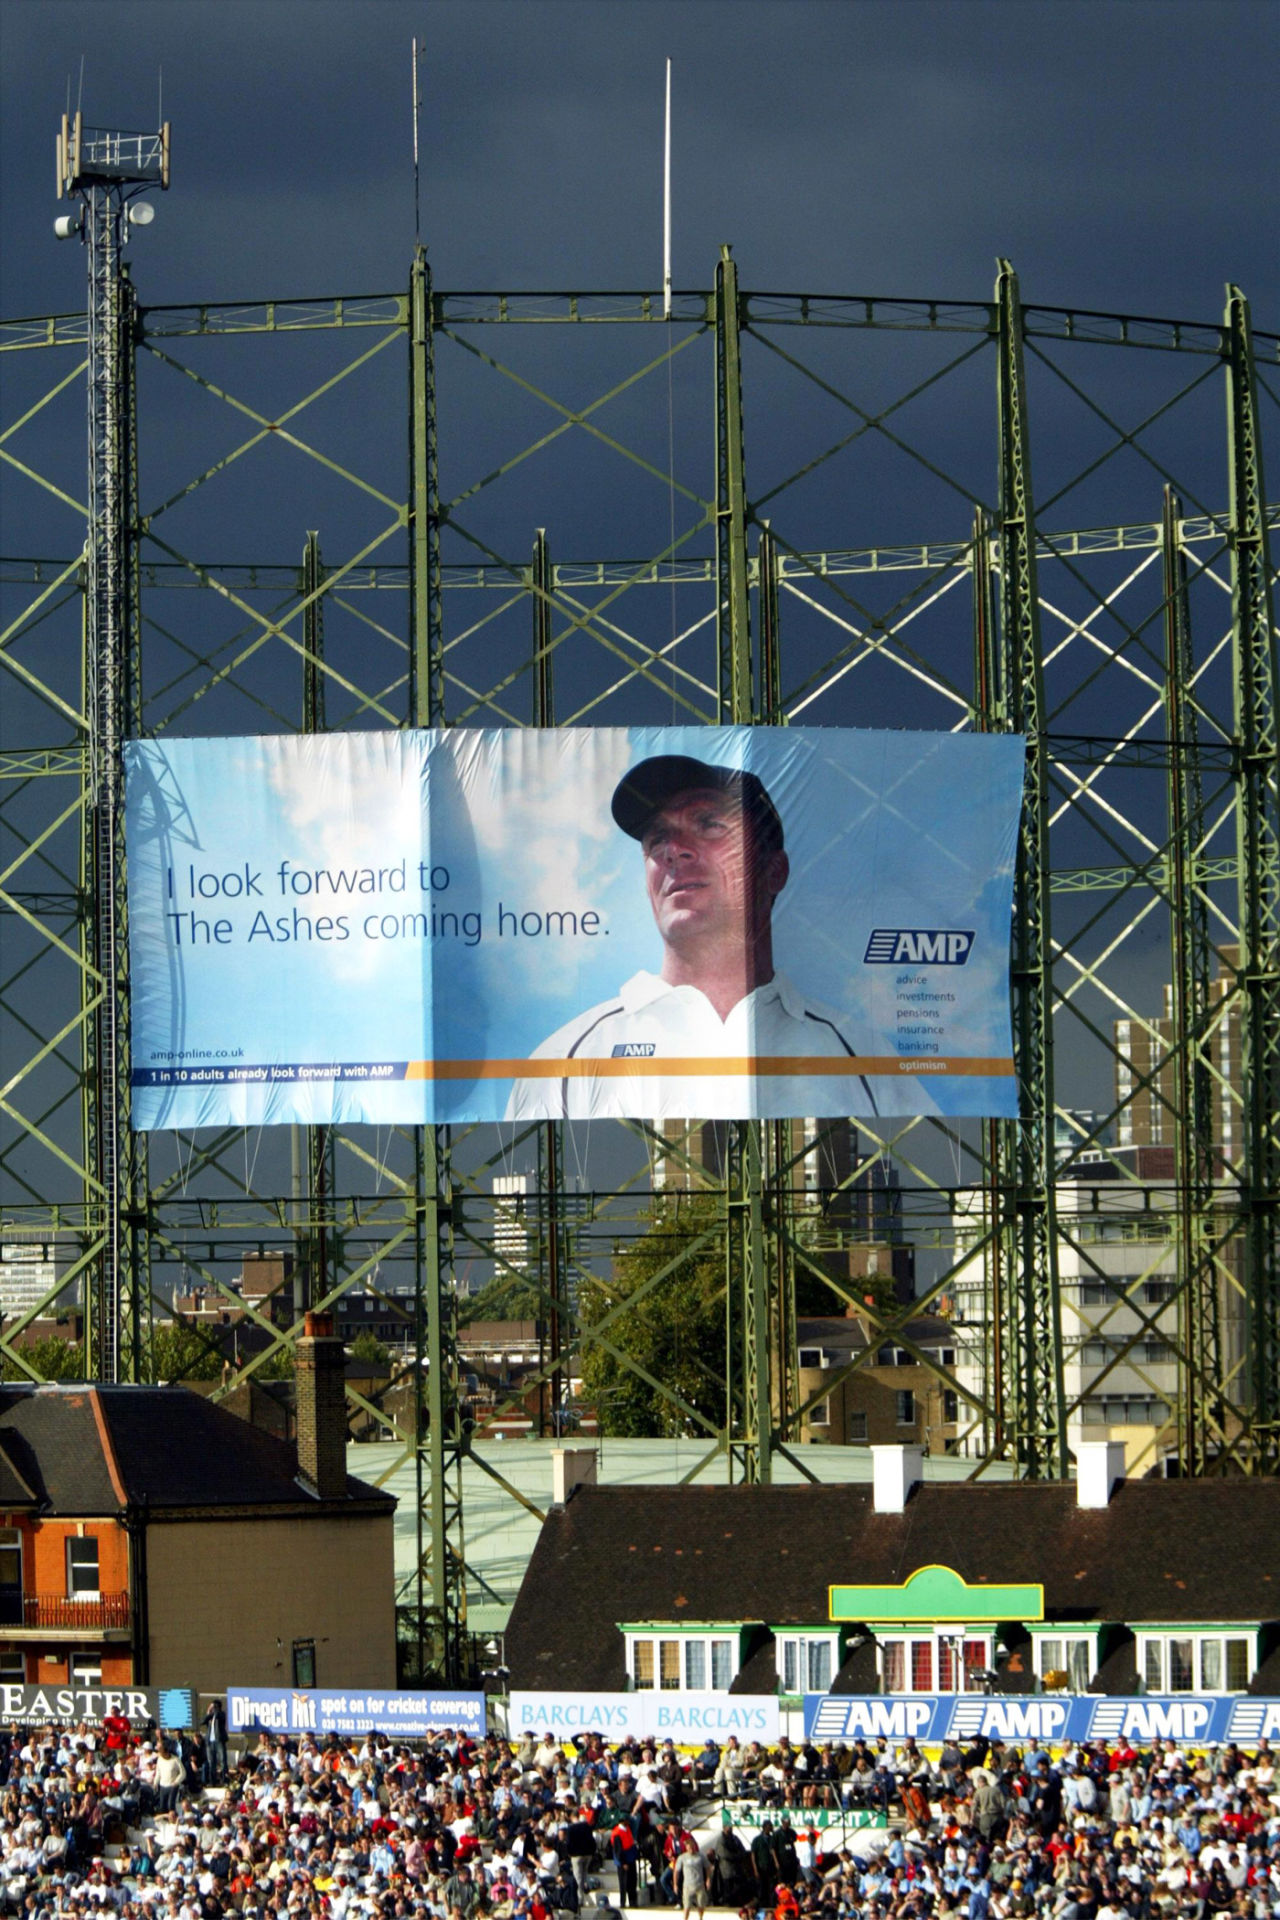 An Ashes advertisement featuring Alec Stewart, England v India, 4th Test, The Oval, 4th day, September 8, 2002